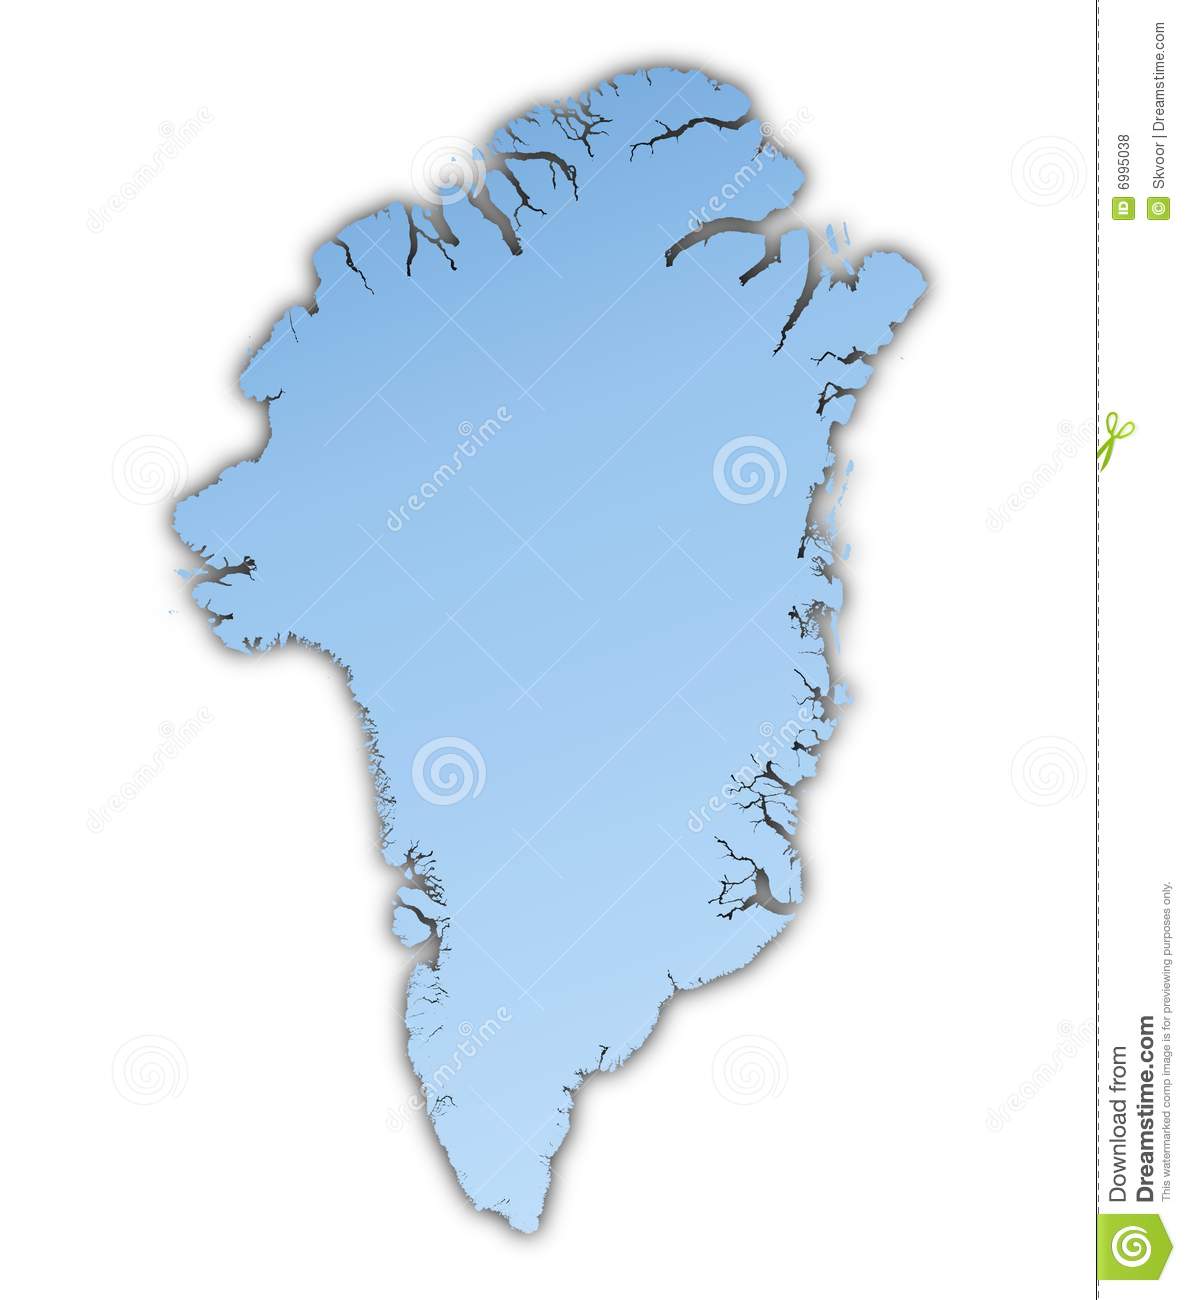 Greenland clipart #13, Download drawings